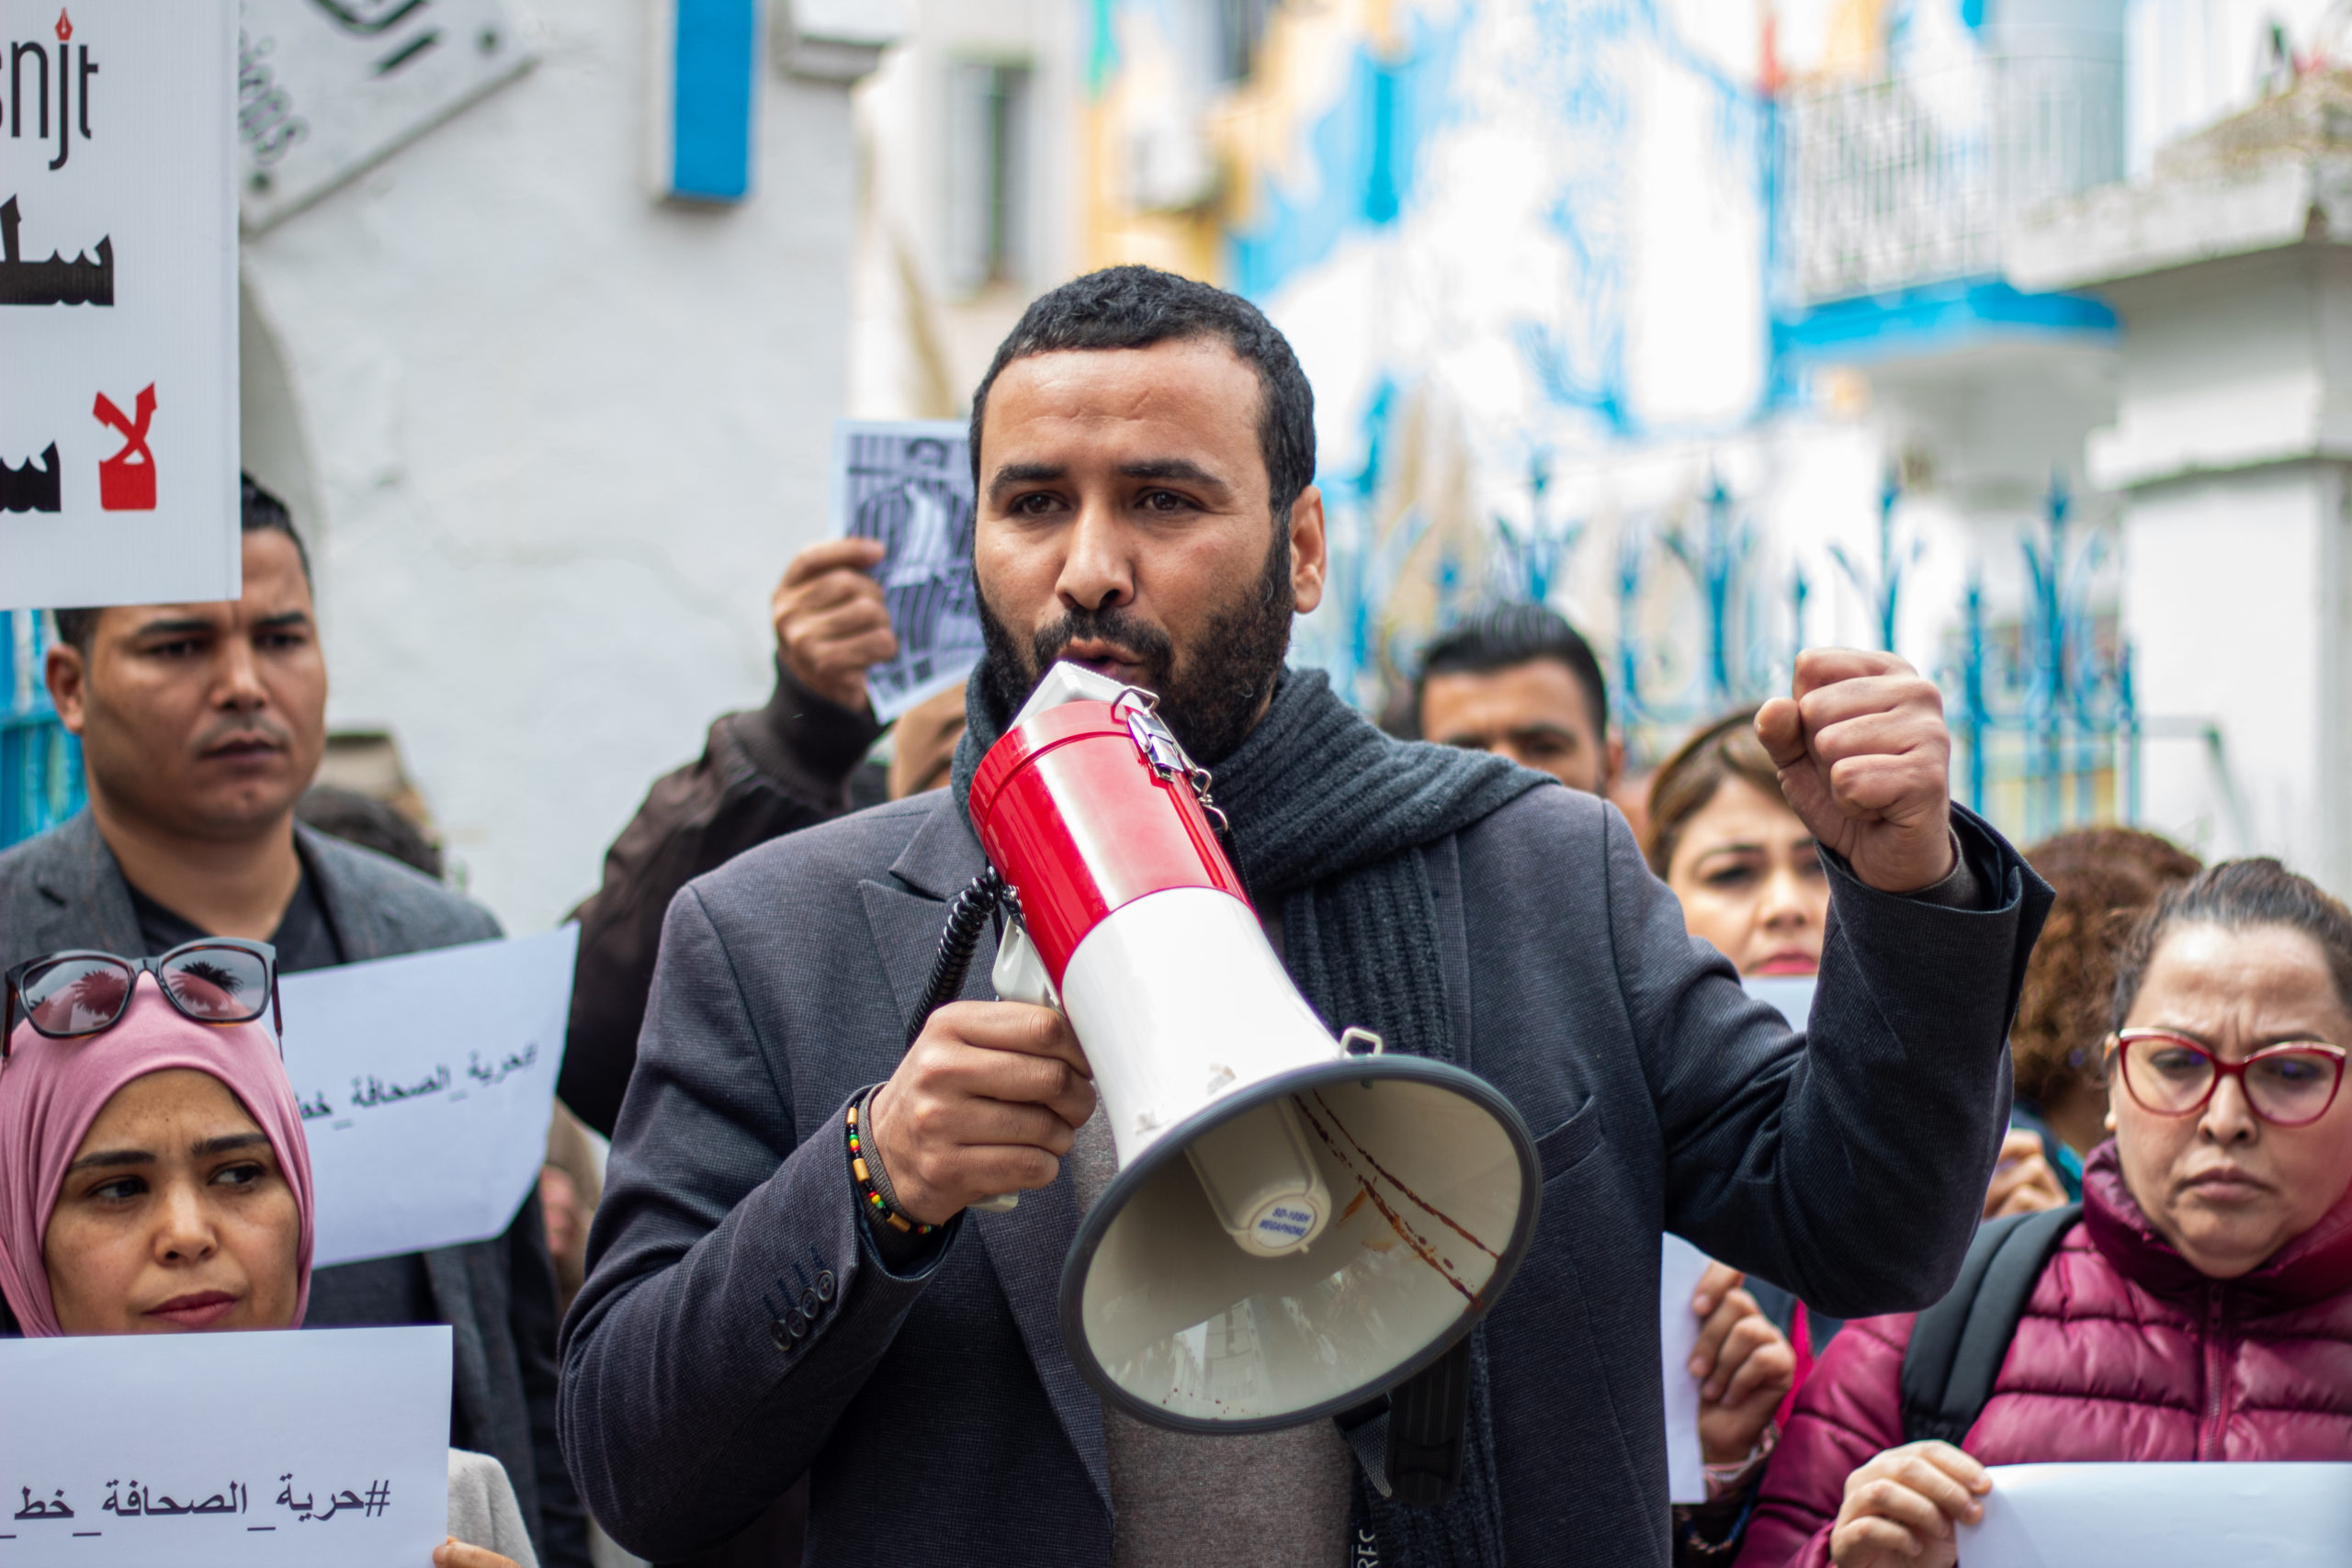 The National Union of Tunisian Journalists (SNJT) President Mohamed Yassine Jelassi speaks at a demonstration in front of the SNJT in Tunis on March 25, 2022